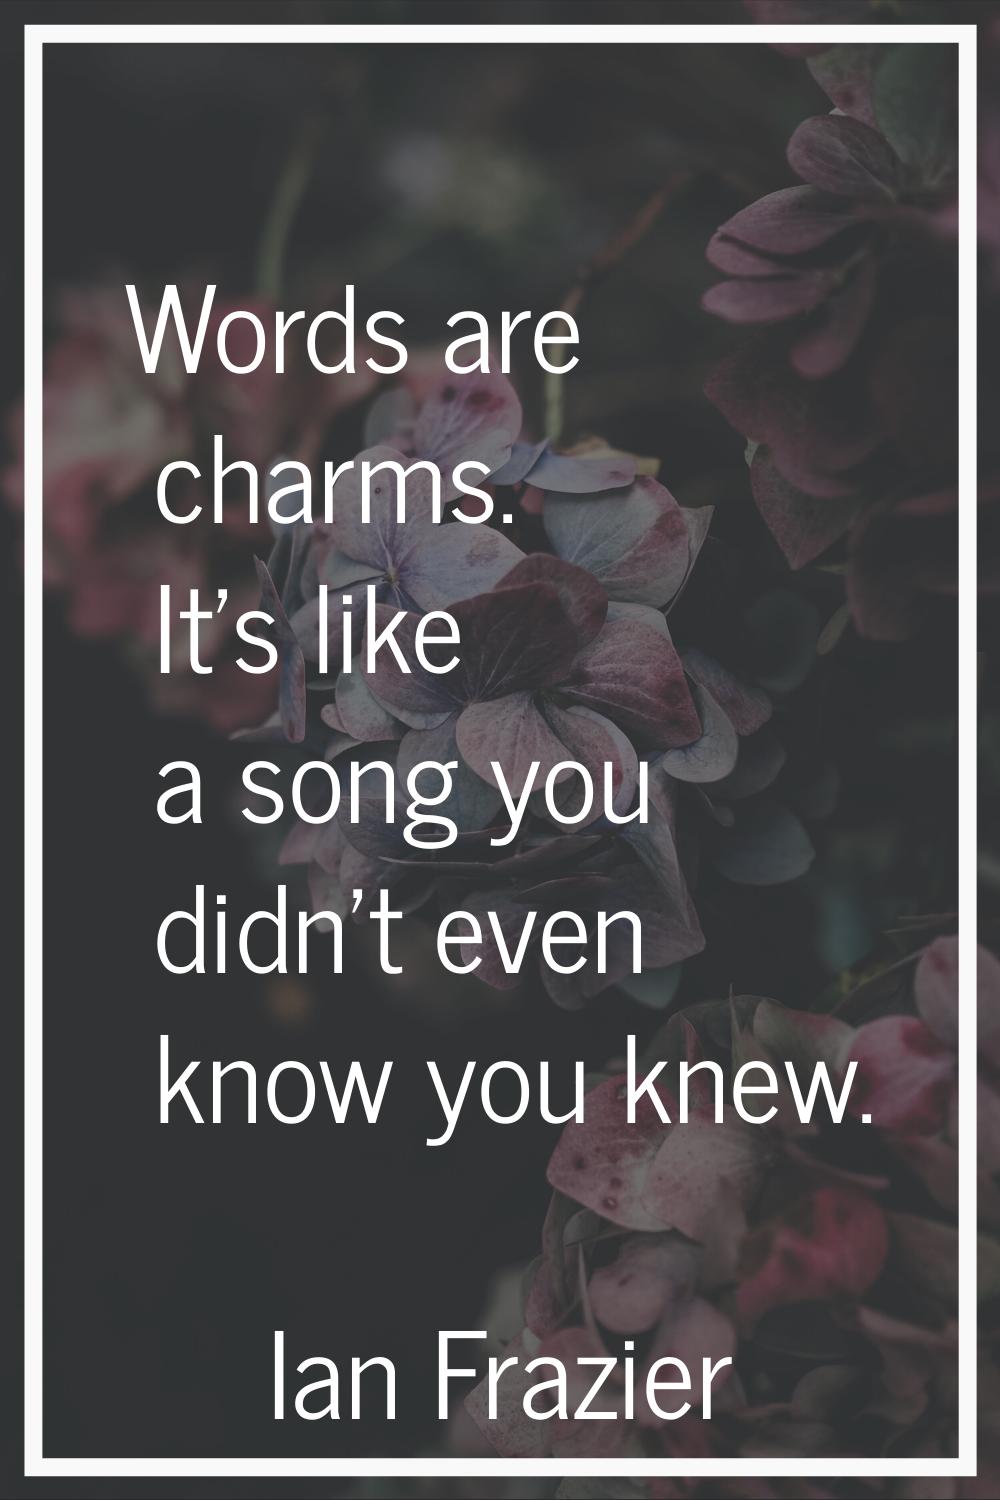 Words are charms. It's like a song you didn't even know you knew.